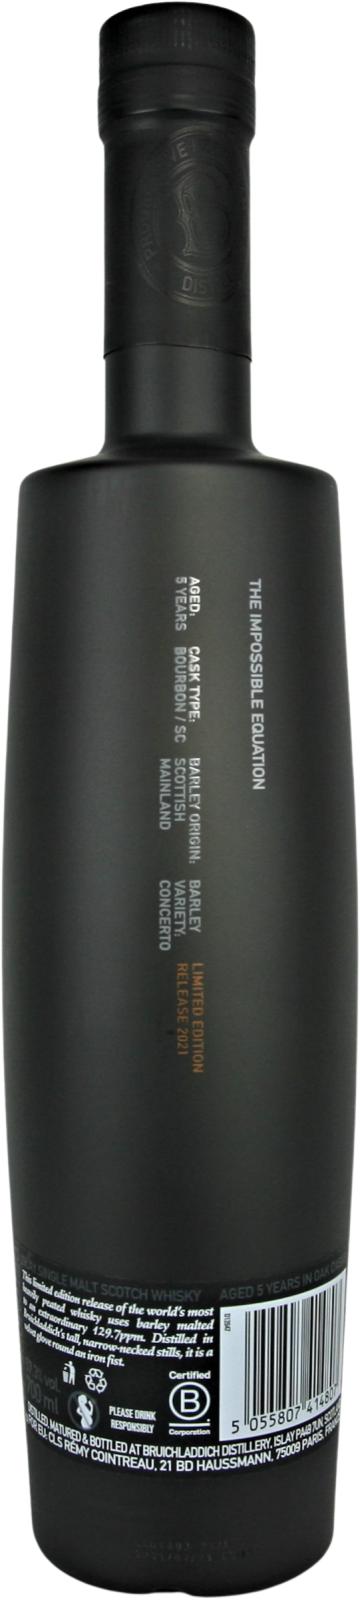 Octomore Edition 12.2 / 129.7 PPM